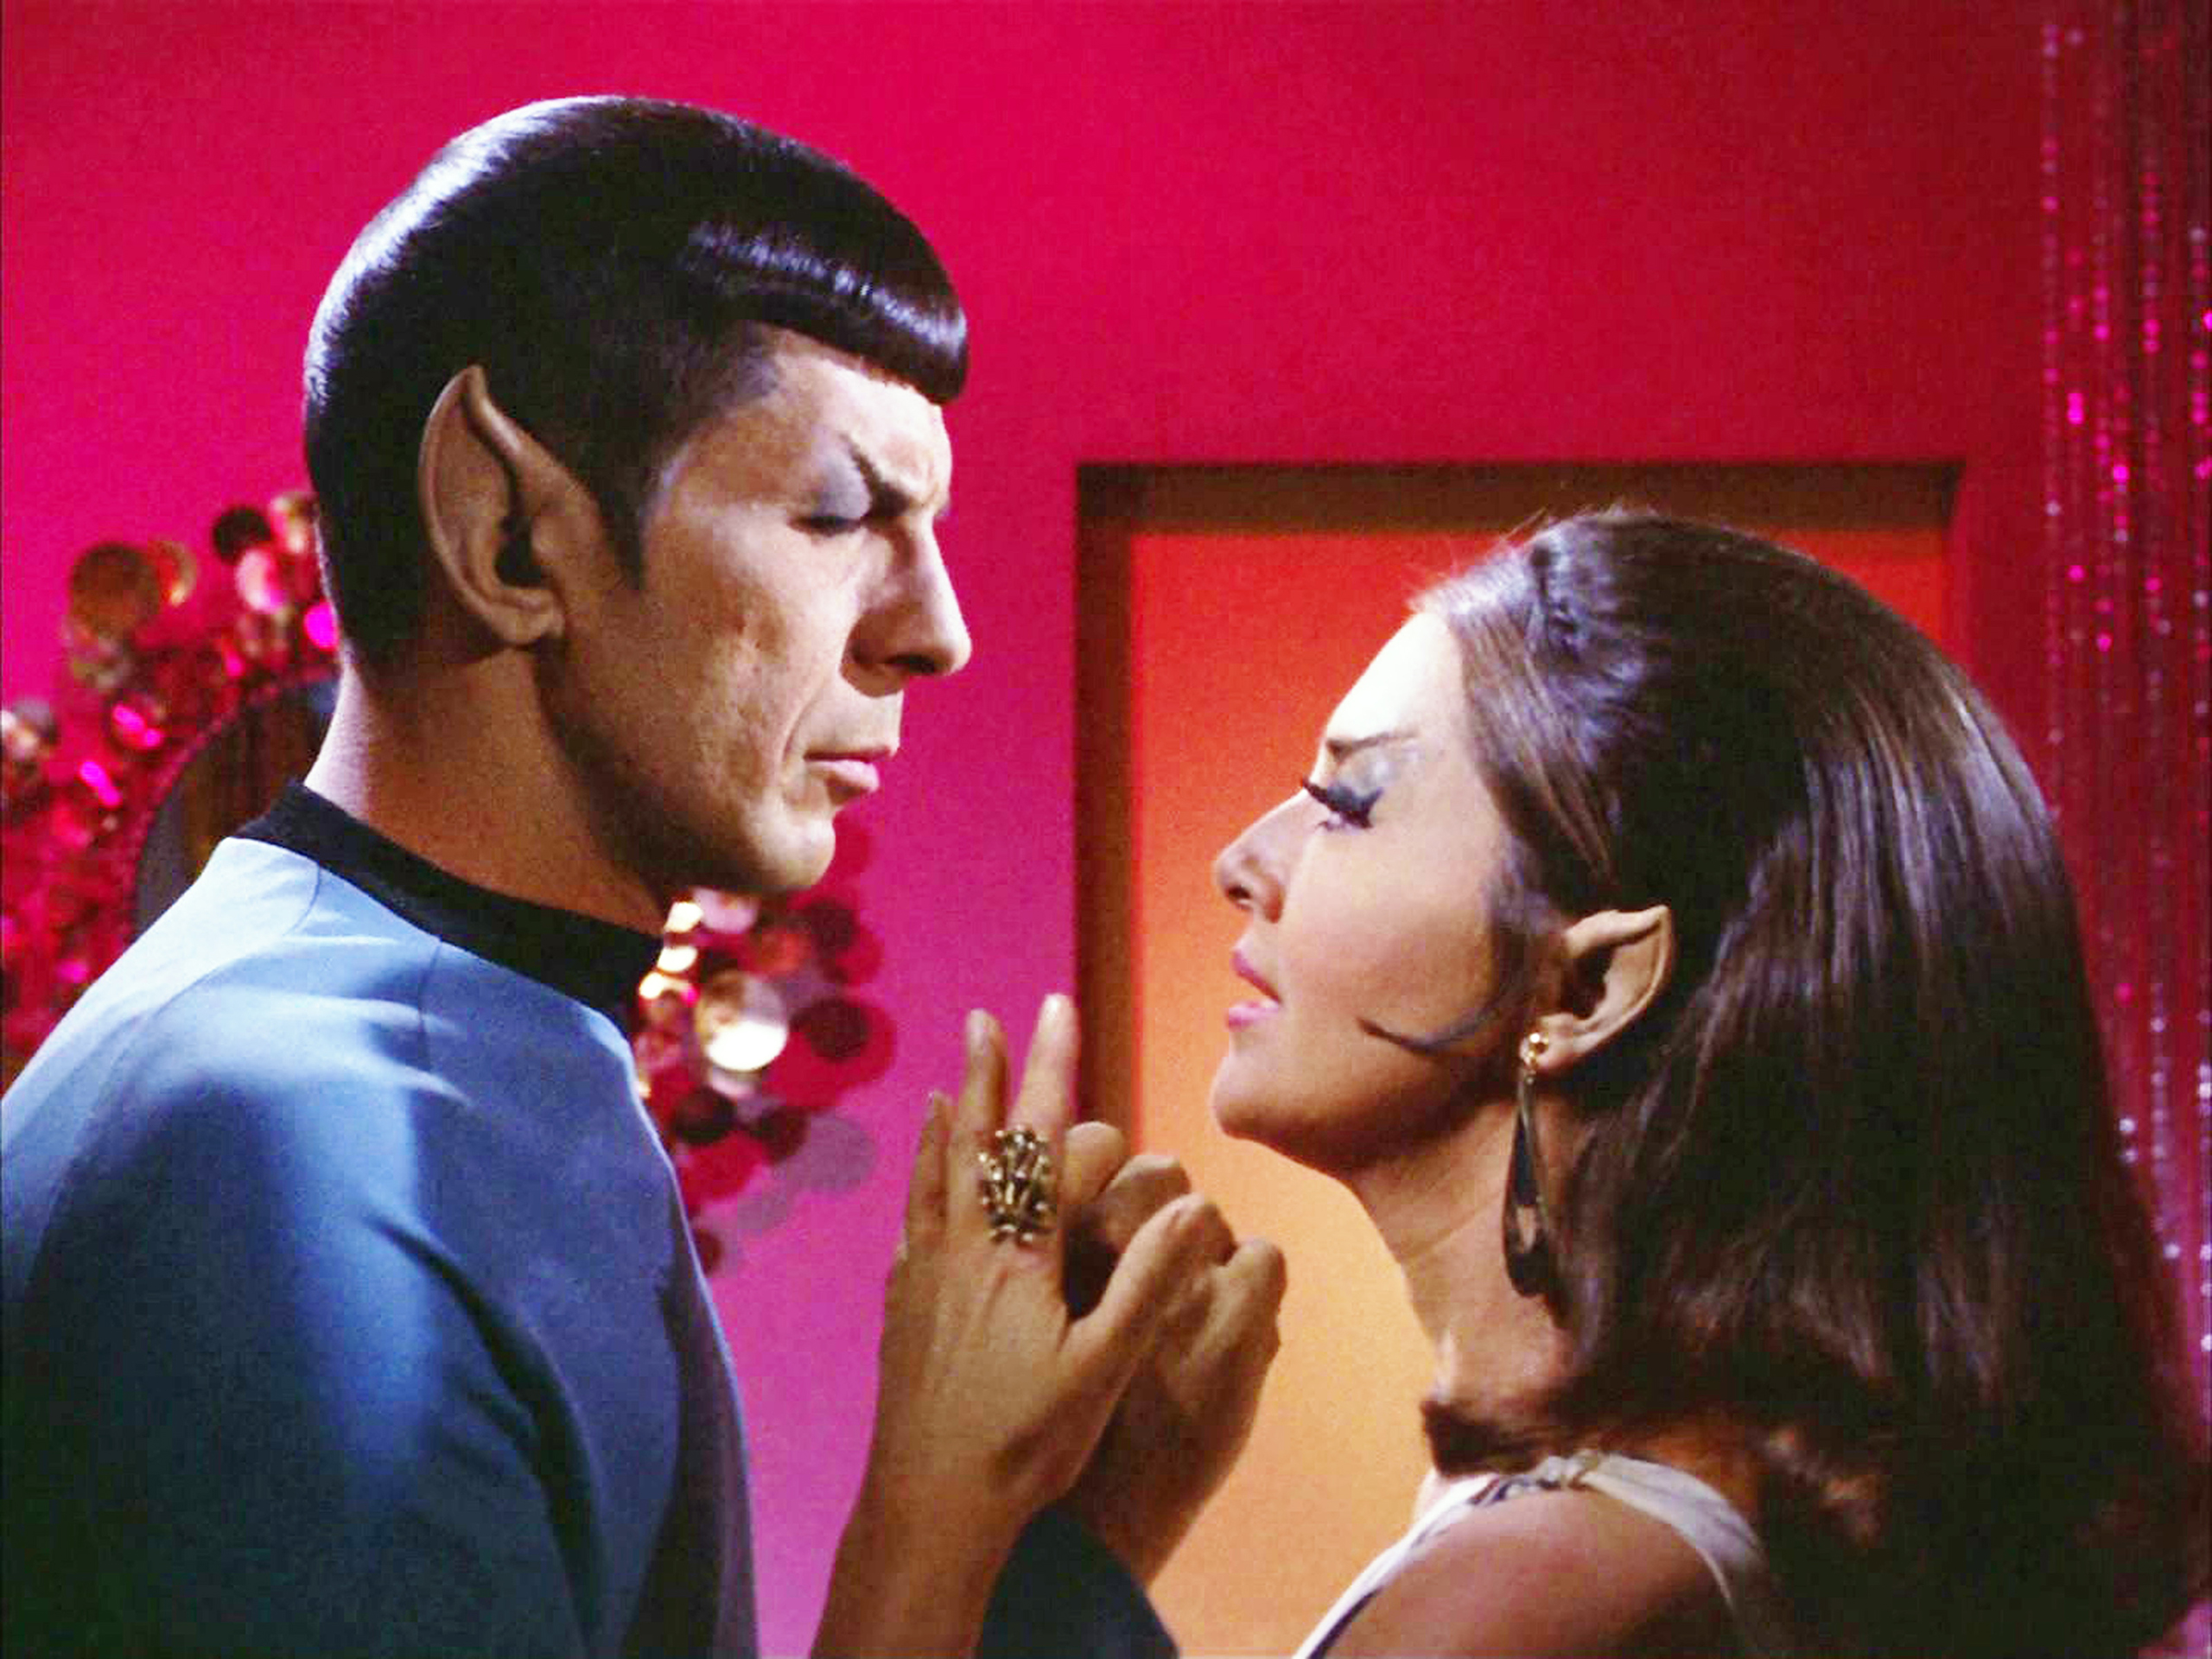 Leonard Nimoy as Mr. Spock and Joanne Linville as Romulan Commander in the Star Trek: The Original Series, Sept. 27, 1968. (CBS/Getty Images)